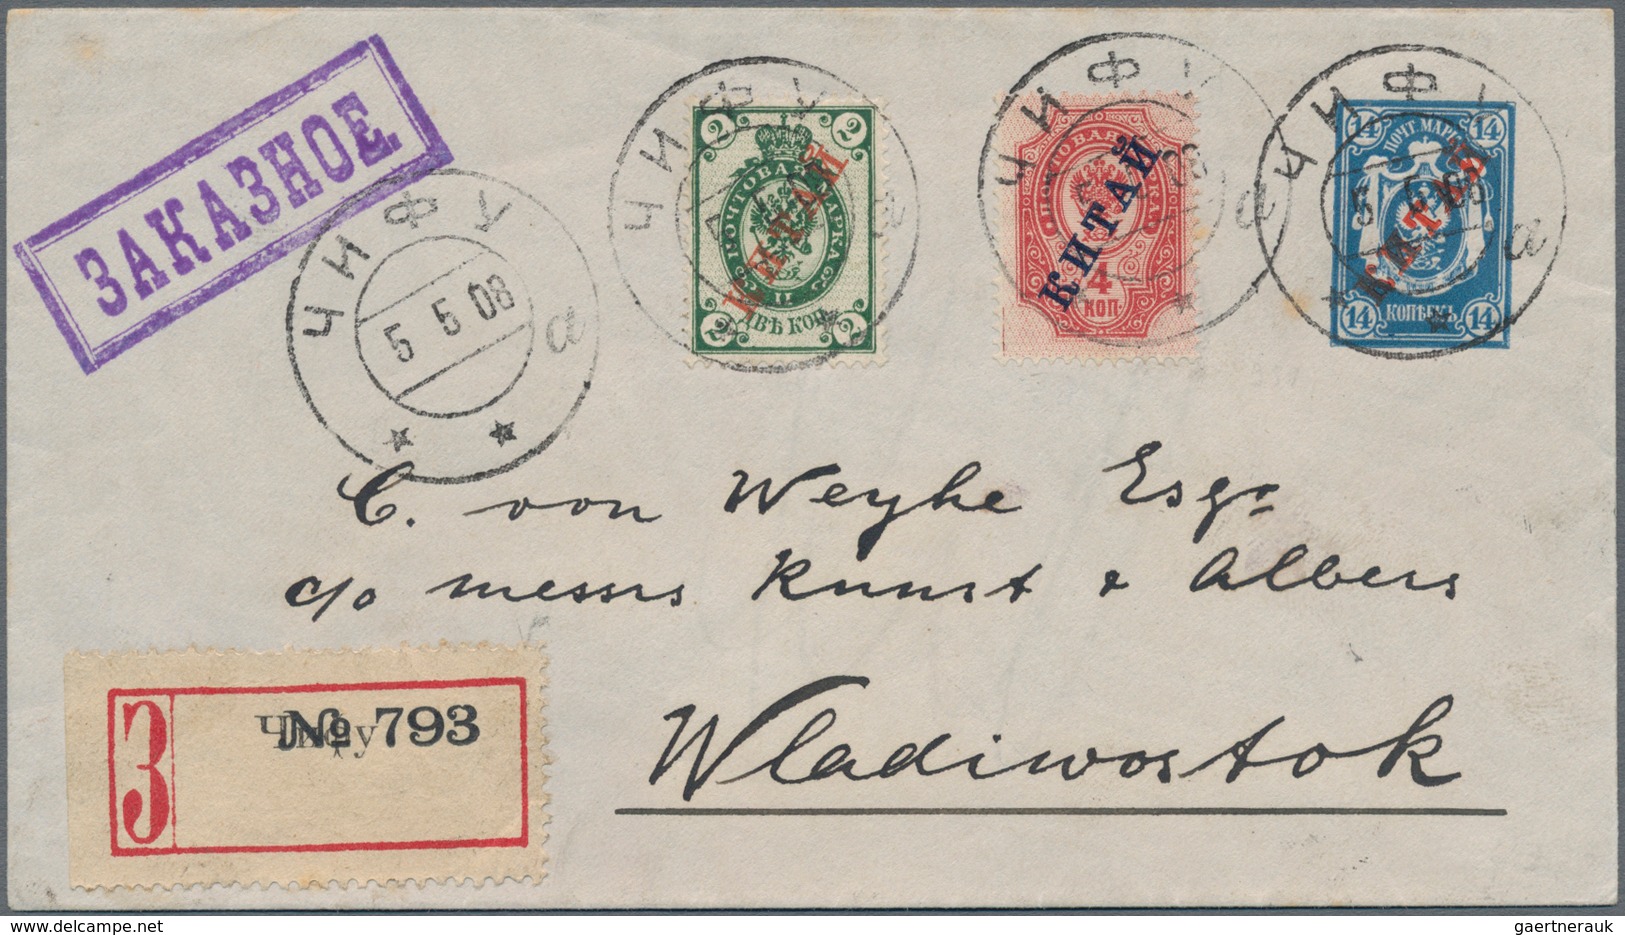 Russische Post In China: 1908, Envelope 14 K. Uprated 2 K., 4 K. Tied "INKOU 5 6 08" Registered To V - China